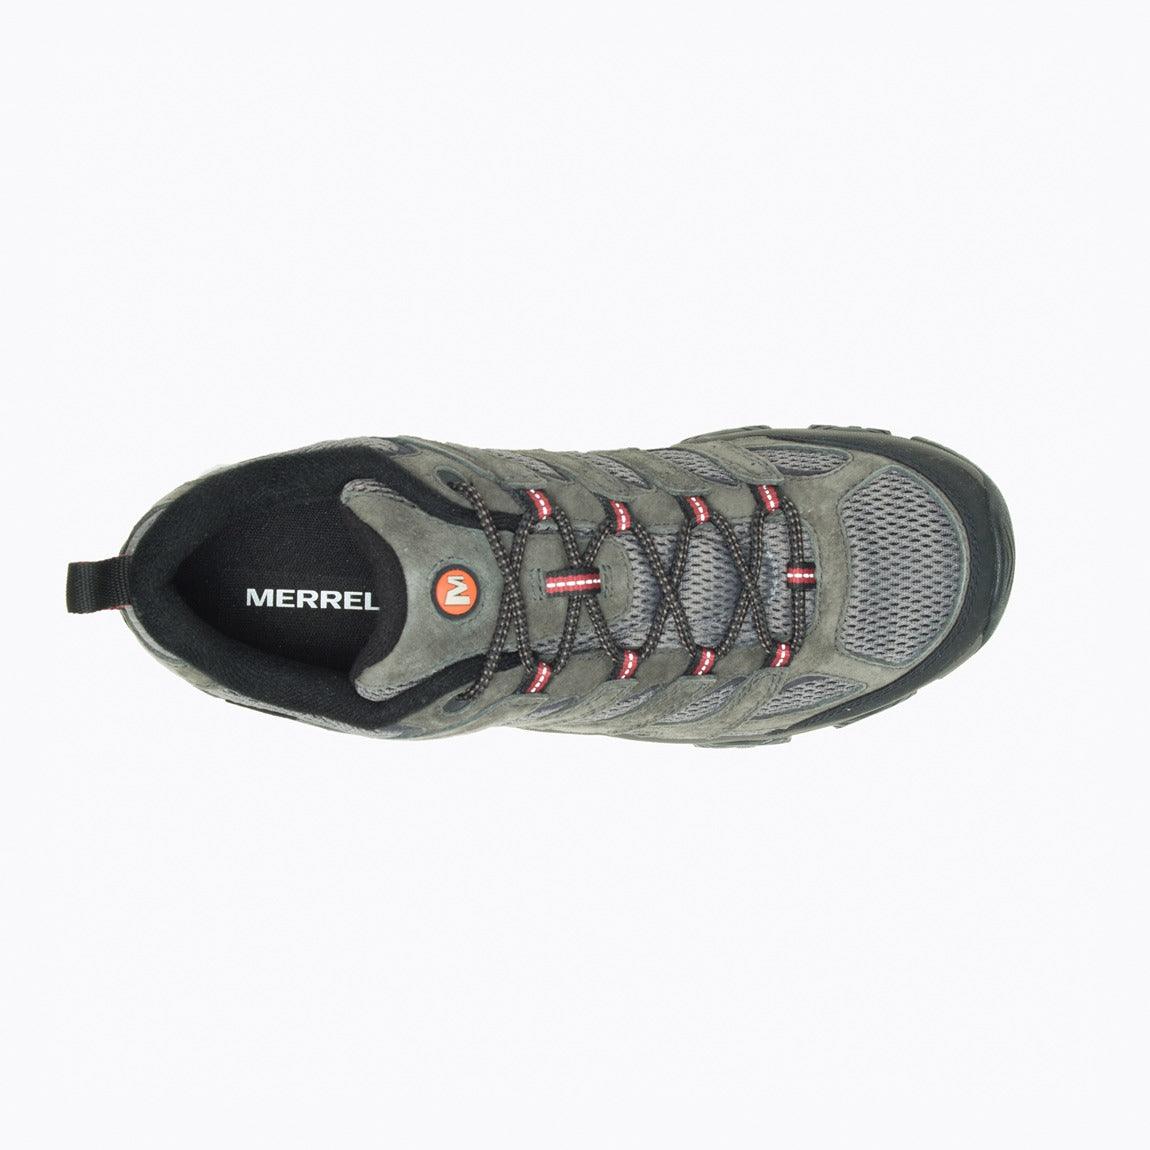 Moab 3 Waterproof Hiking shoes - Men - Sports Excellence